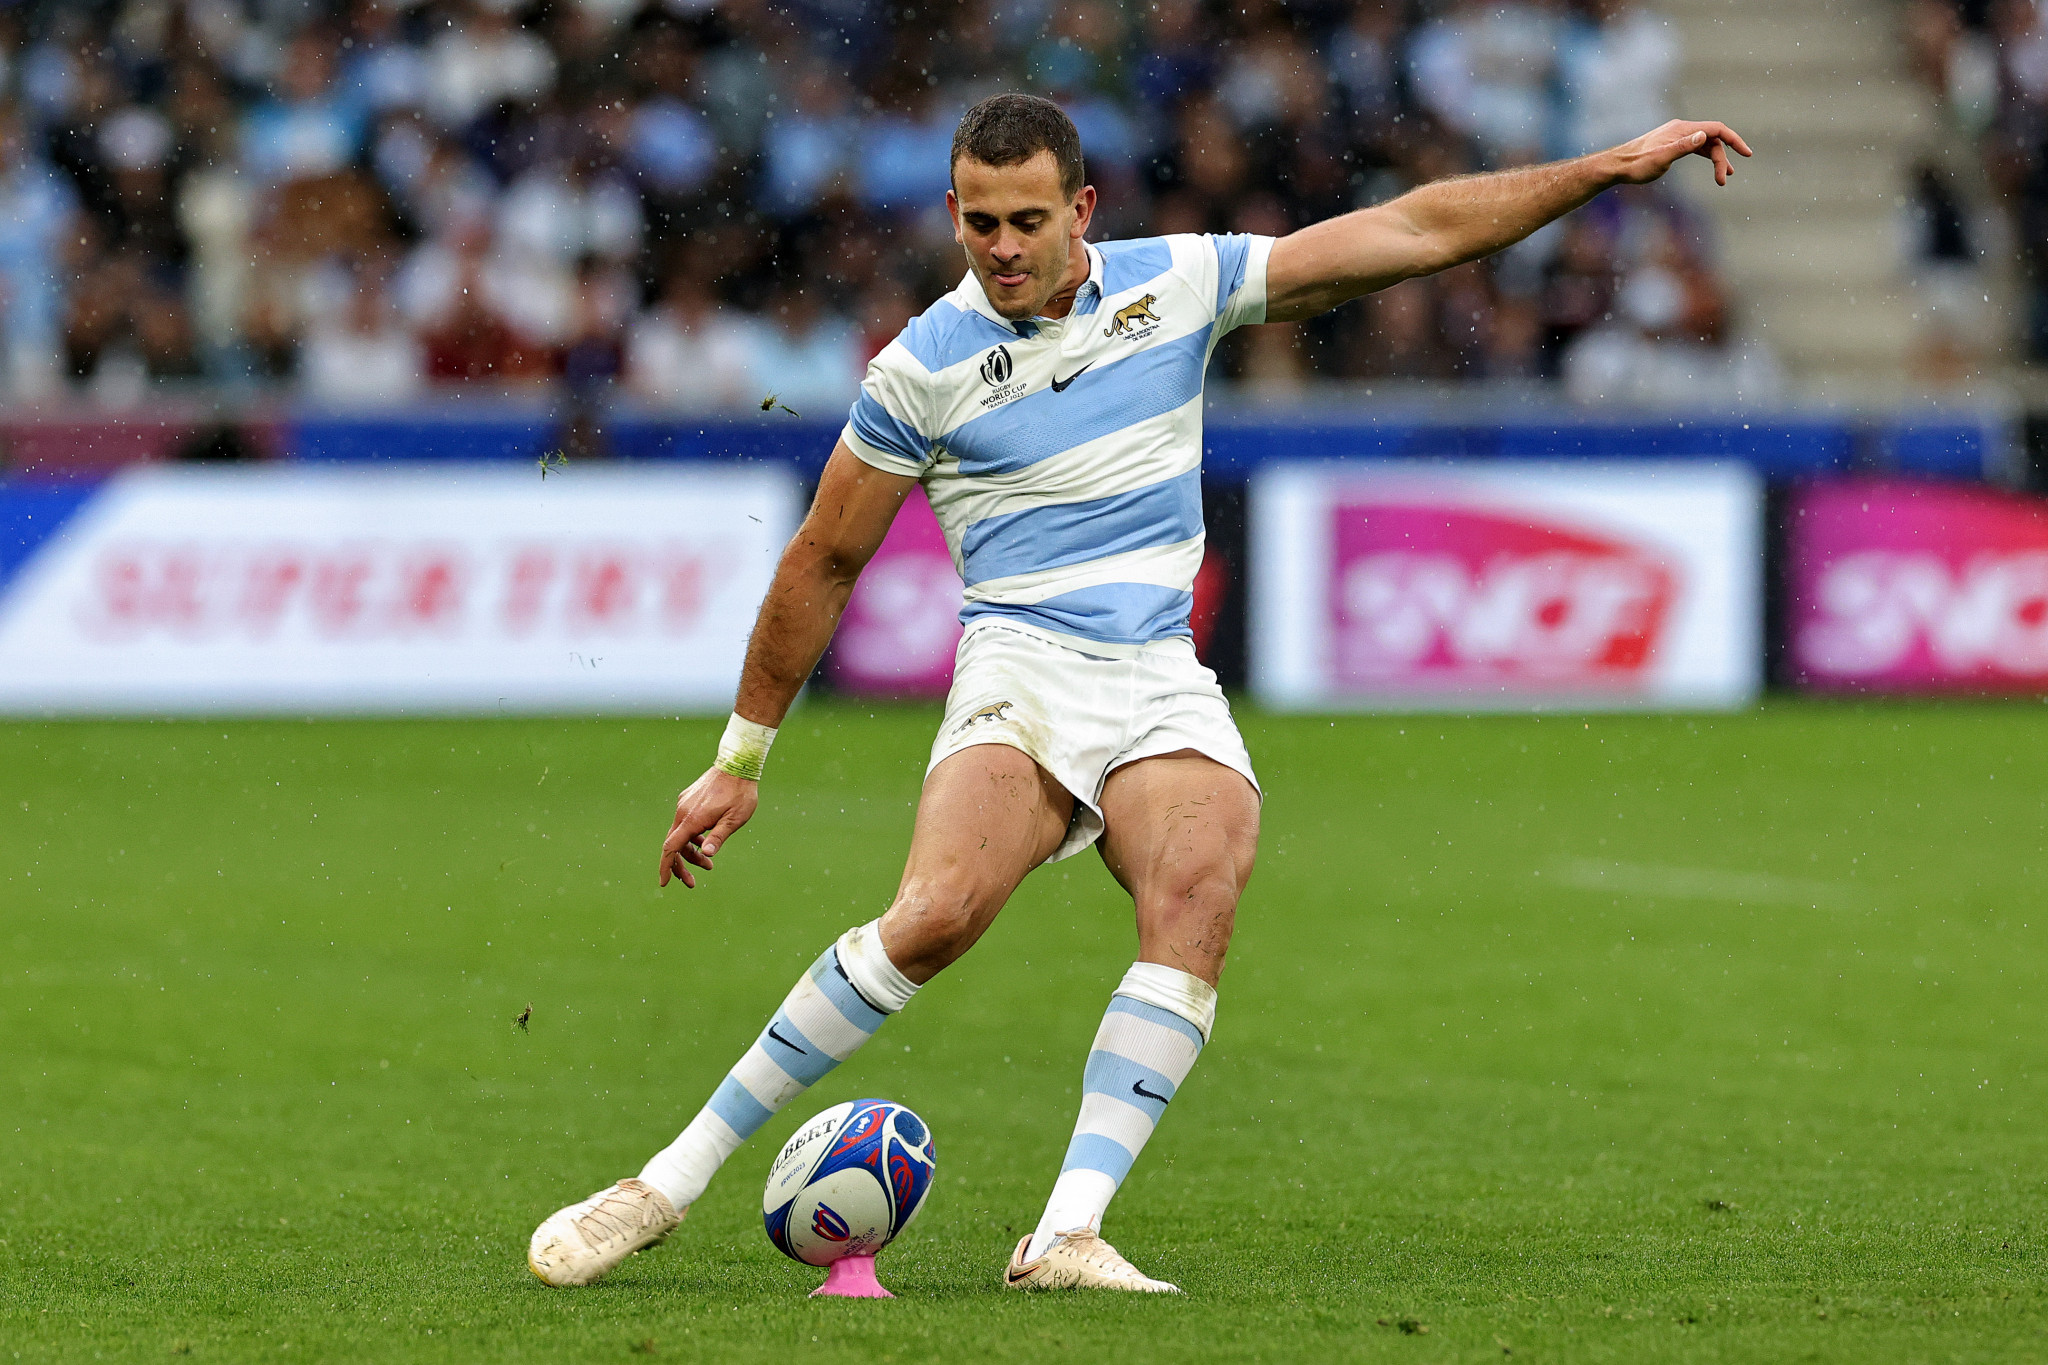 Boffelli brilliance propels Argentina to first win of Rugby World Cup against Samoa